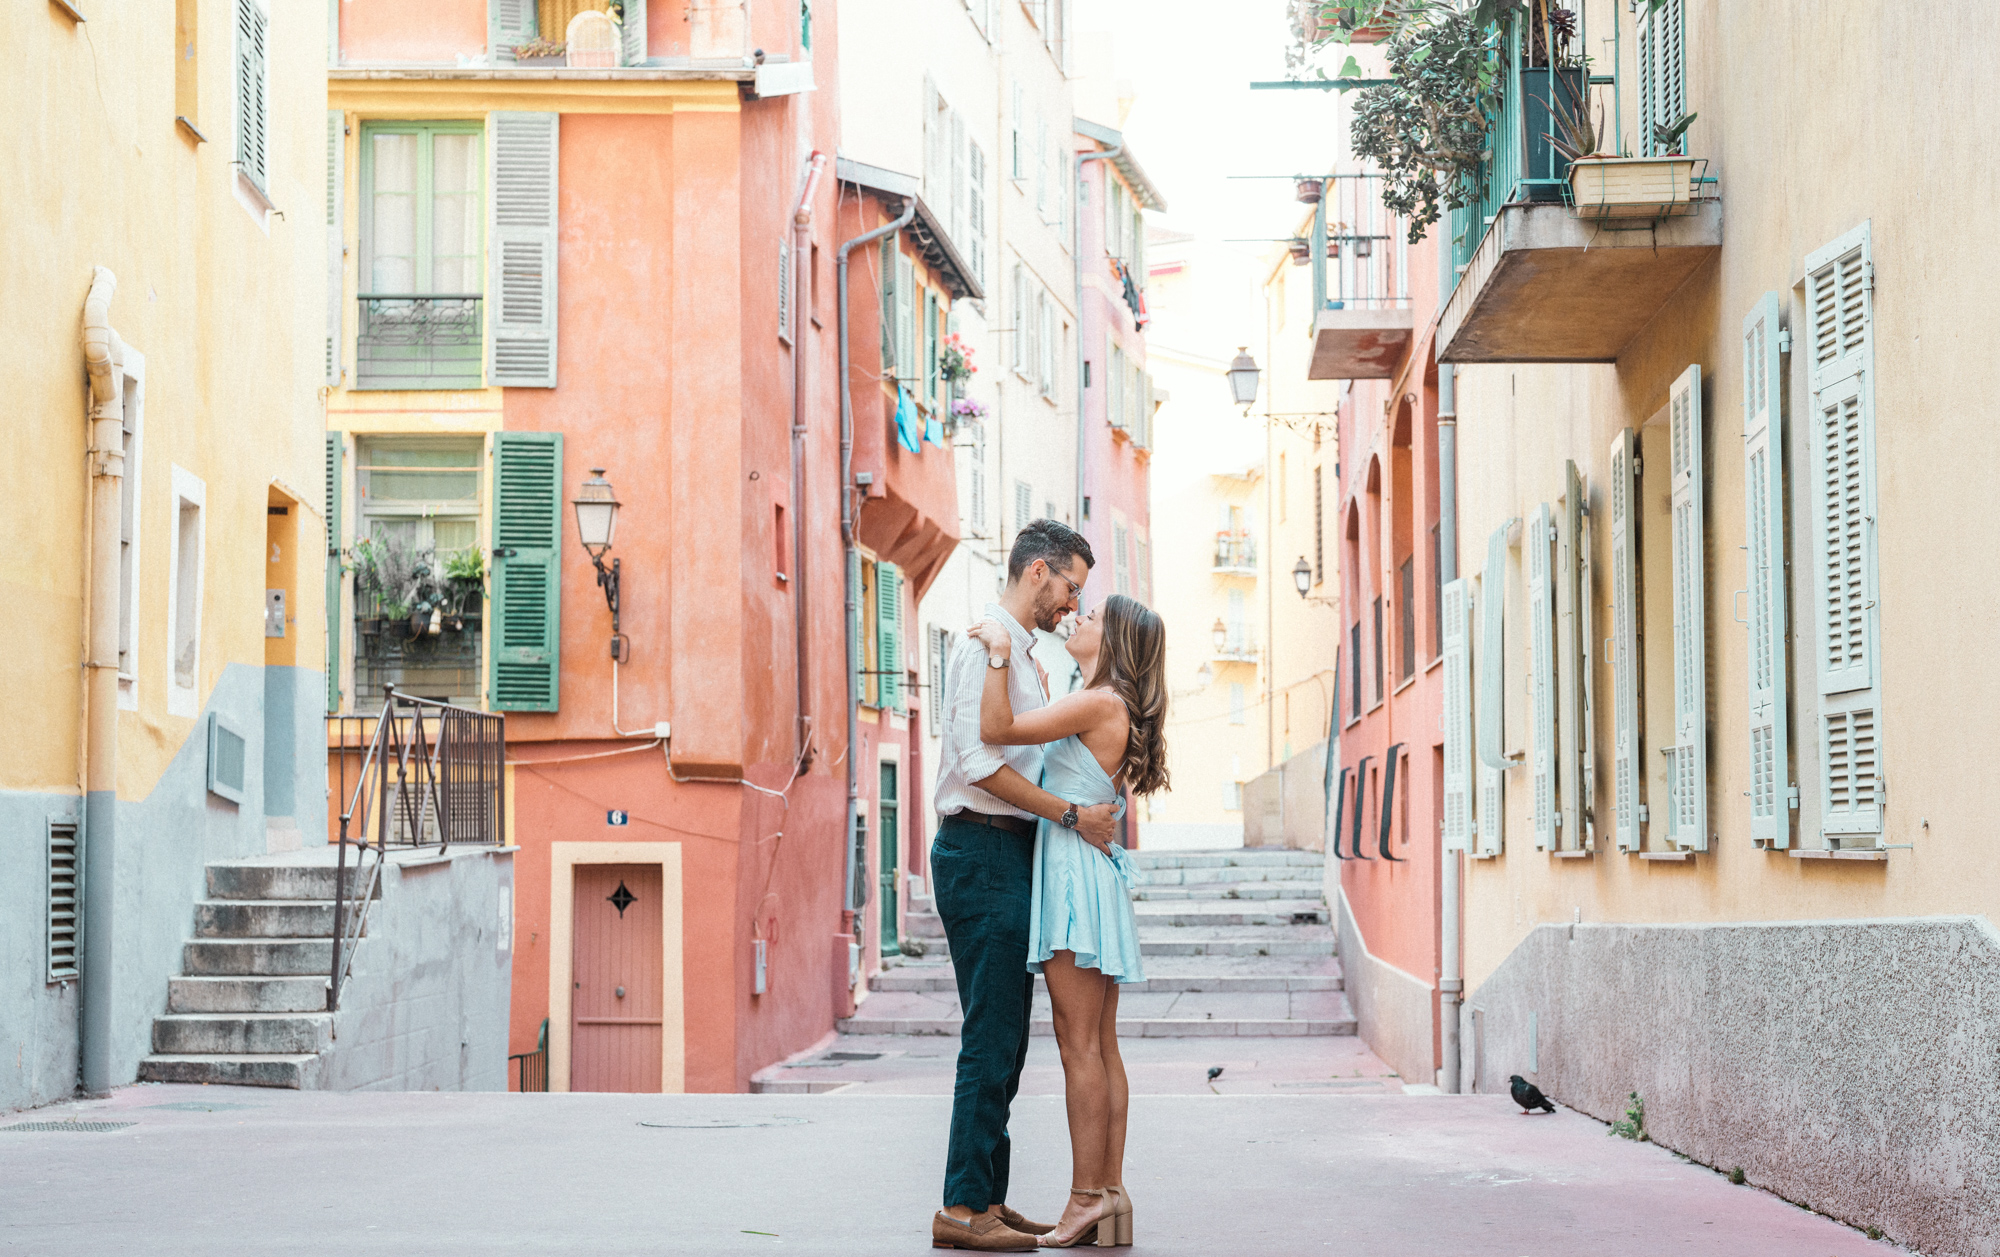 cute couple embrace with colorful buildings in nice france